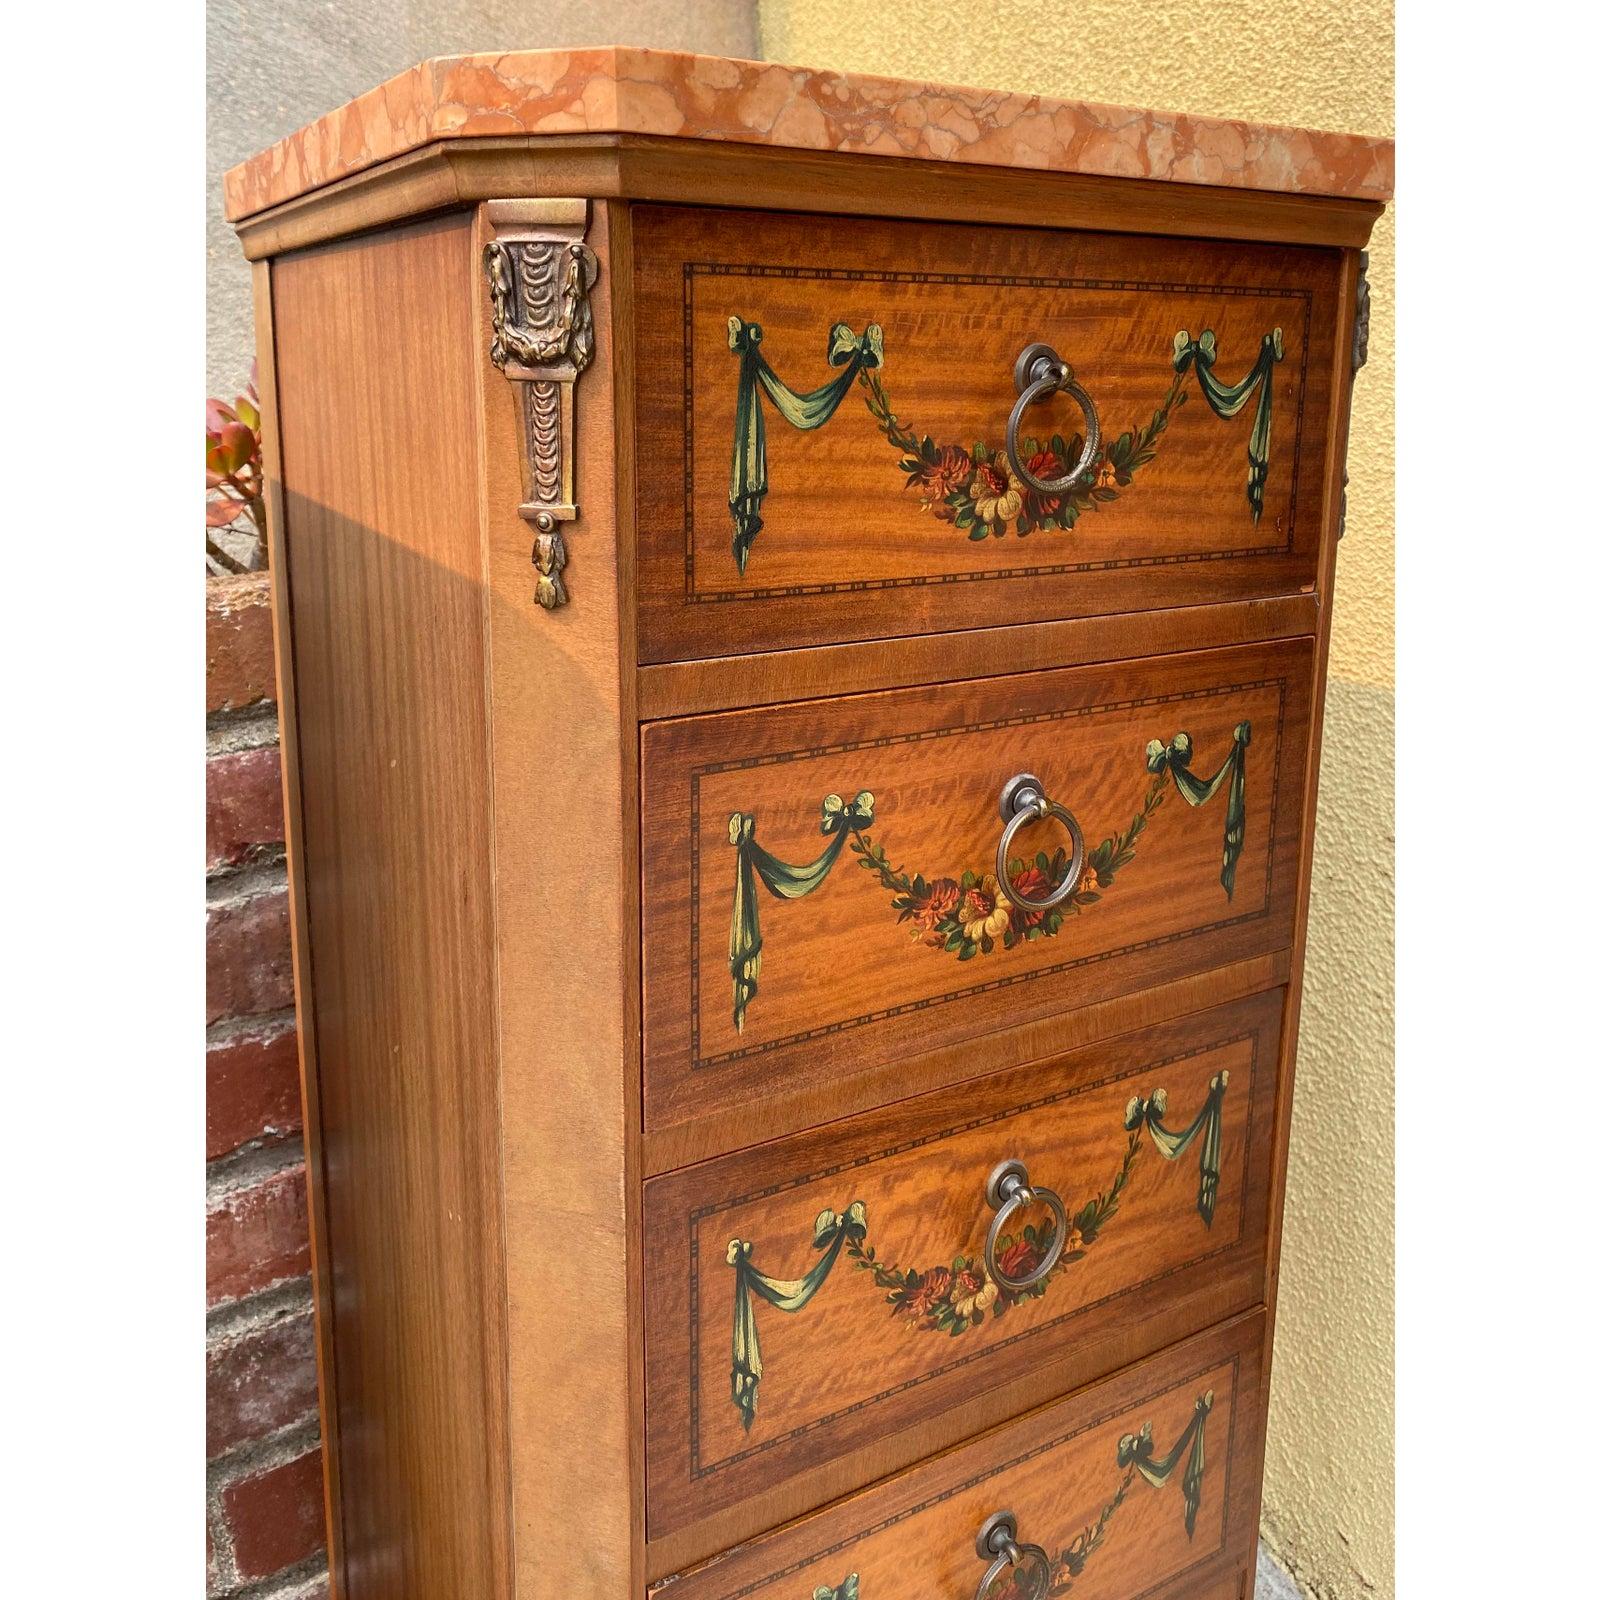 Pair of French style walnut and marble chest of drawers by Johnson Handley Johnson, circa 1927

Gorgeous pair of handcrafted and hand painted chest of drawers.

Tall and graceful. Dovetail construction. Marble tops. Hand painted floral